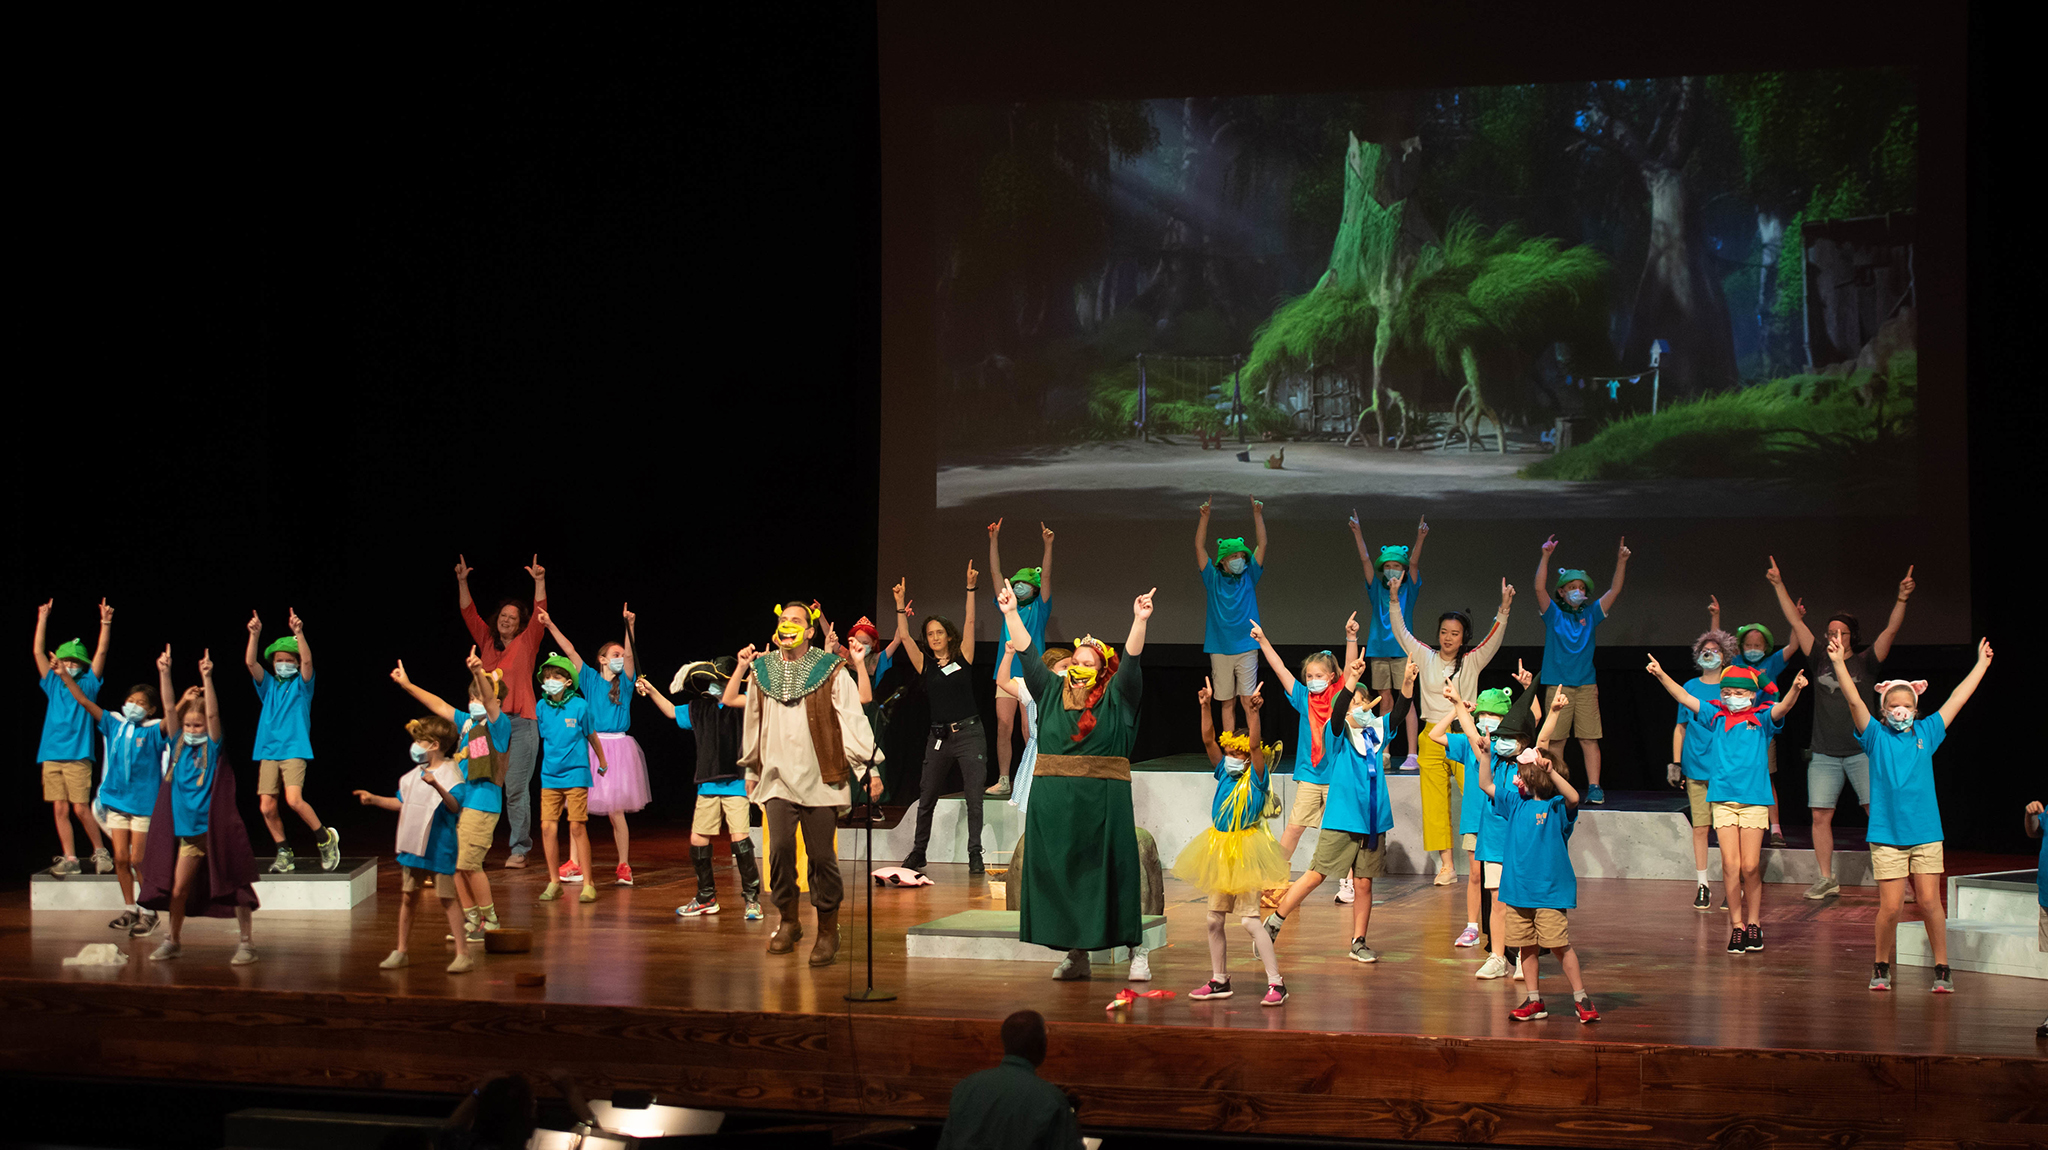 The Gertrude C. Ford Center for the Performing Arts at the University of Mississippi has expanded its Youth Theatre Music Workshop and family-friendly events.